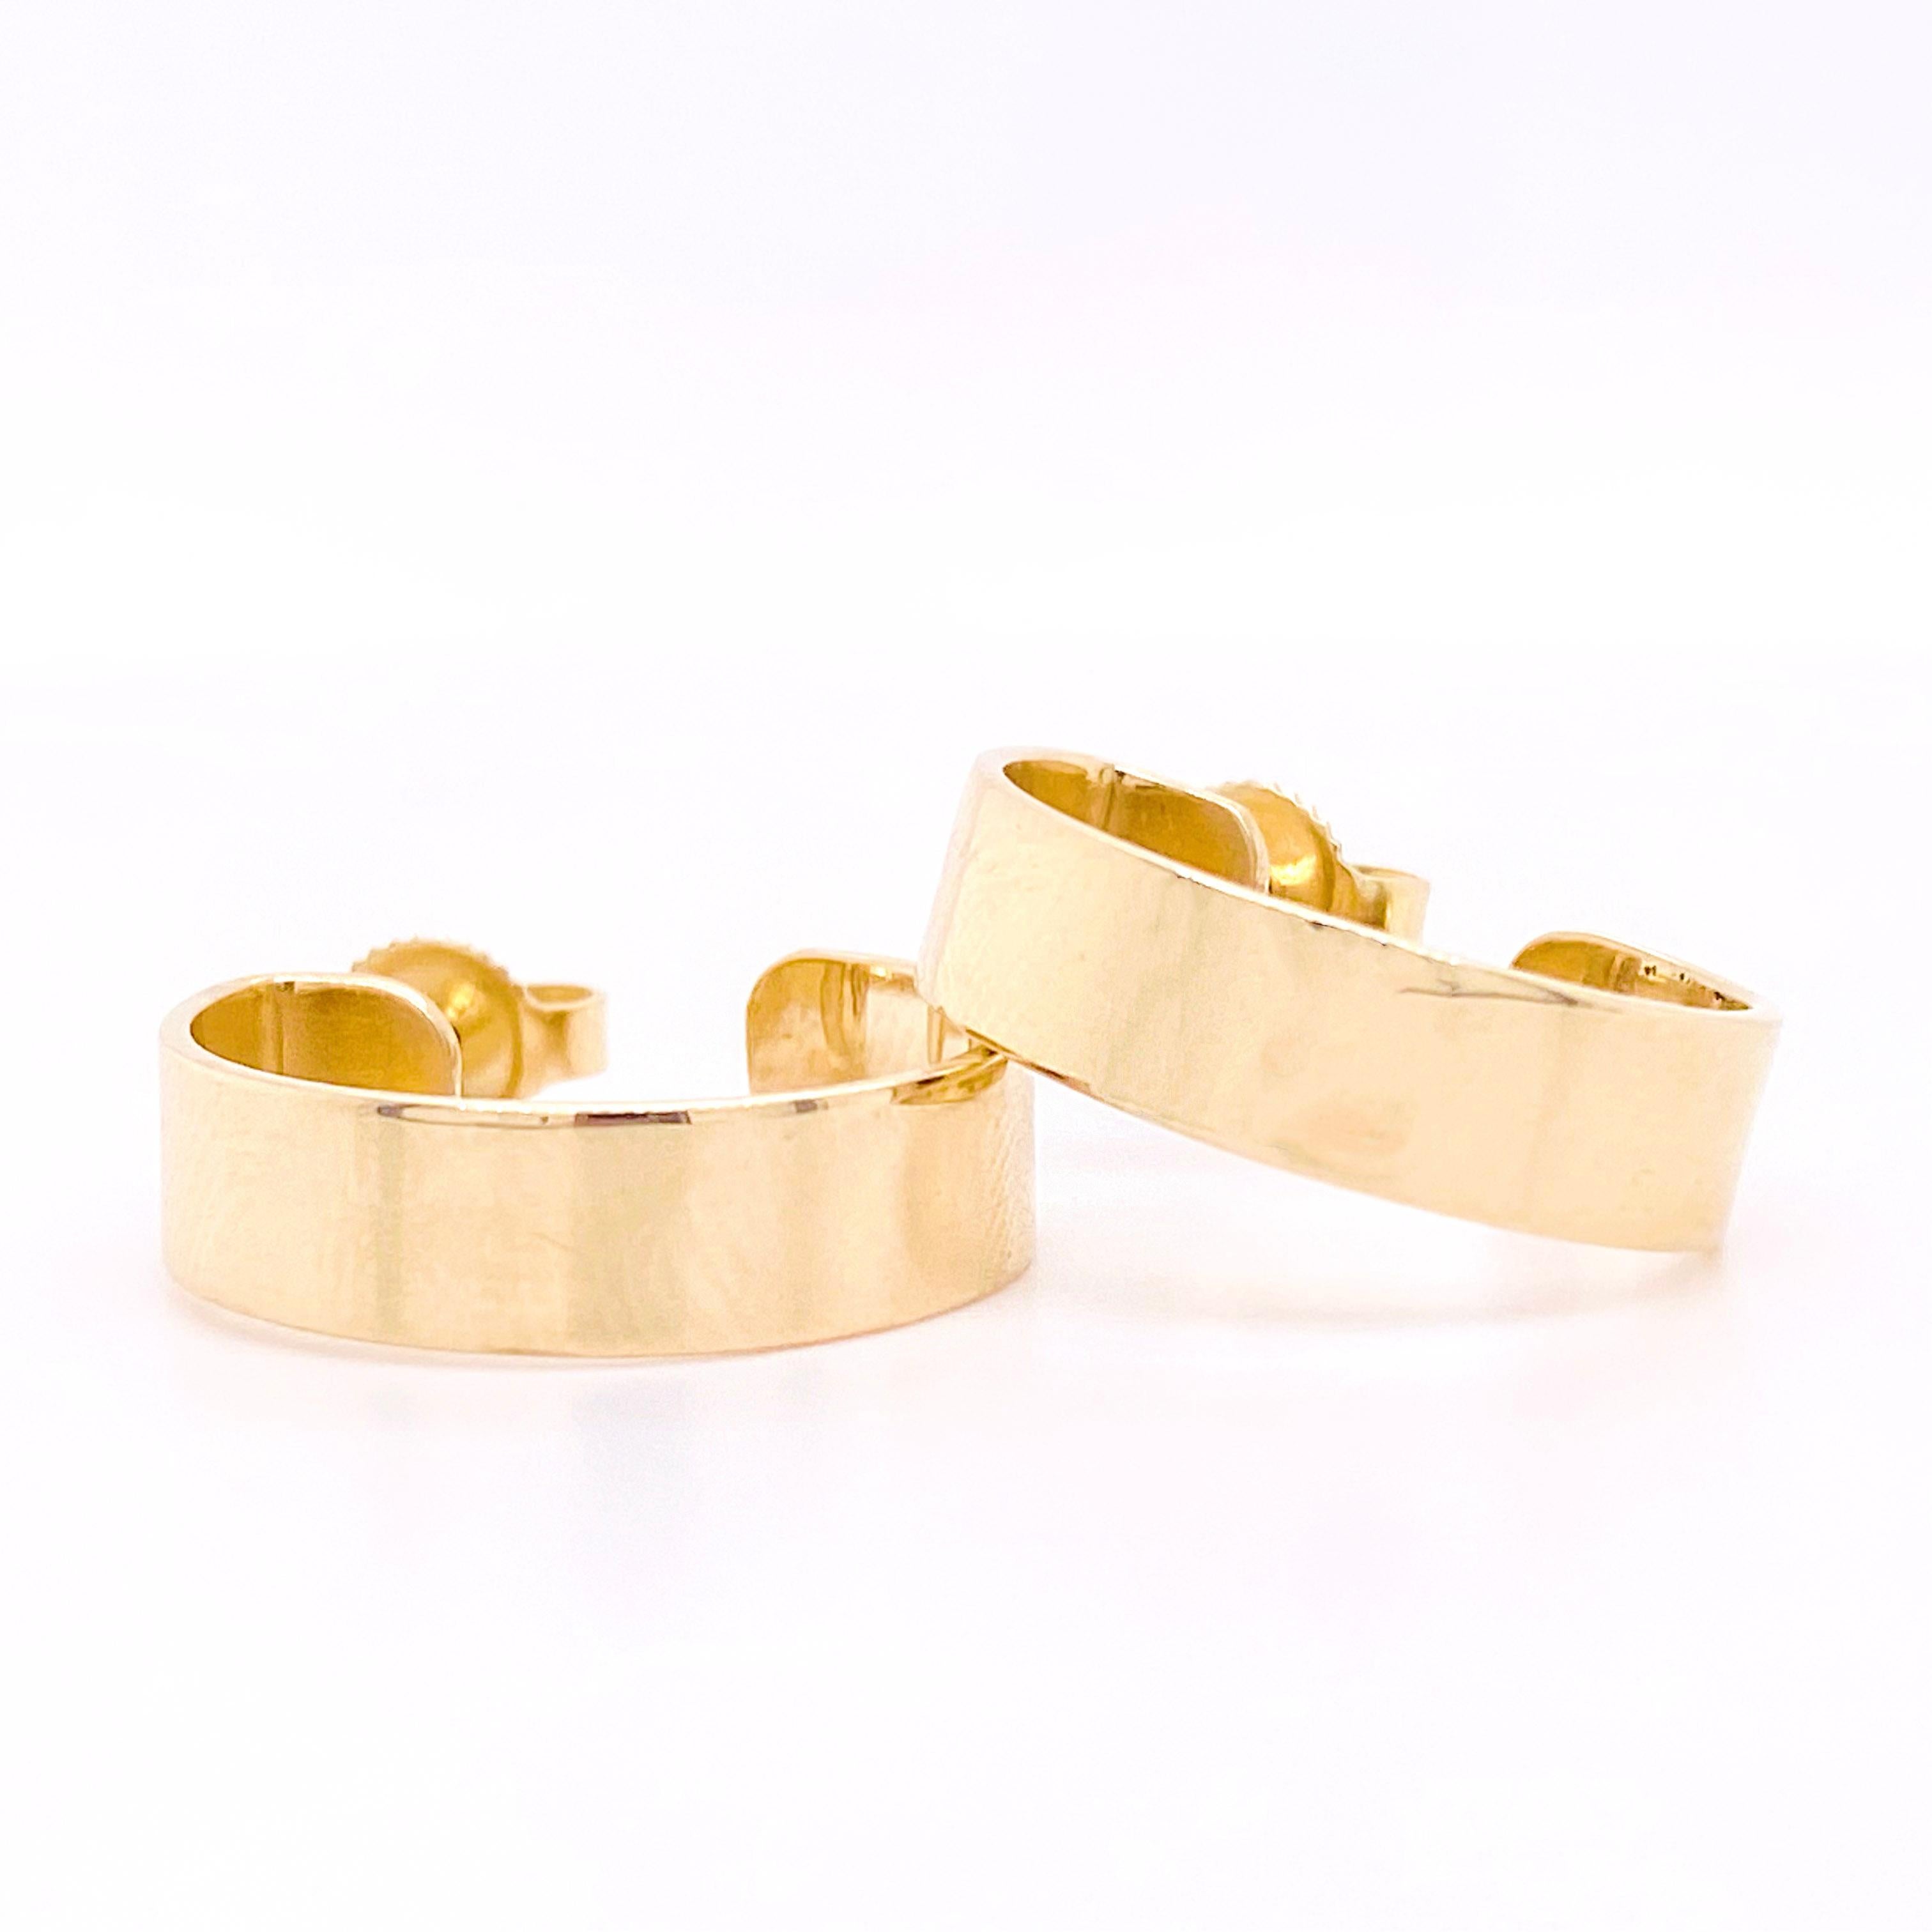 James Avery is iconic and known for their high quality 14 karat yellow gold and sterling jewelry. Each of the earrings have the James Avery Hallmark on the inside of the hoop. James Avery started his business in Kerrville, Texas and has many shops